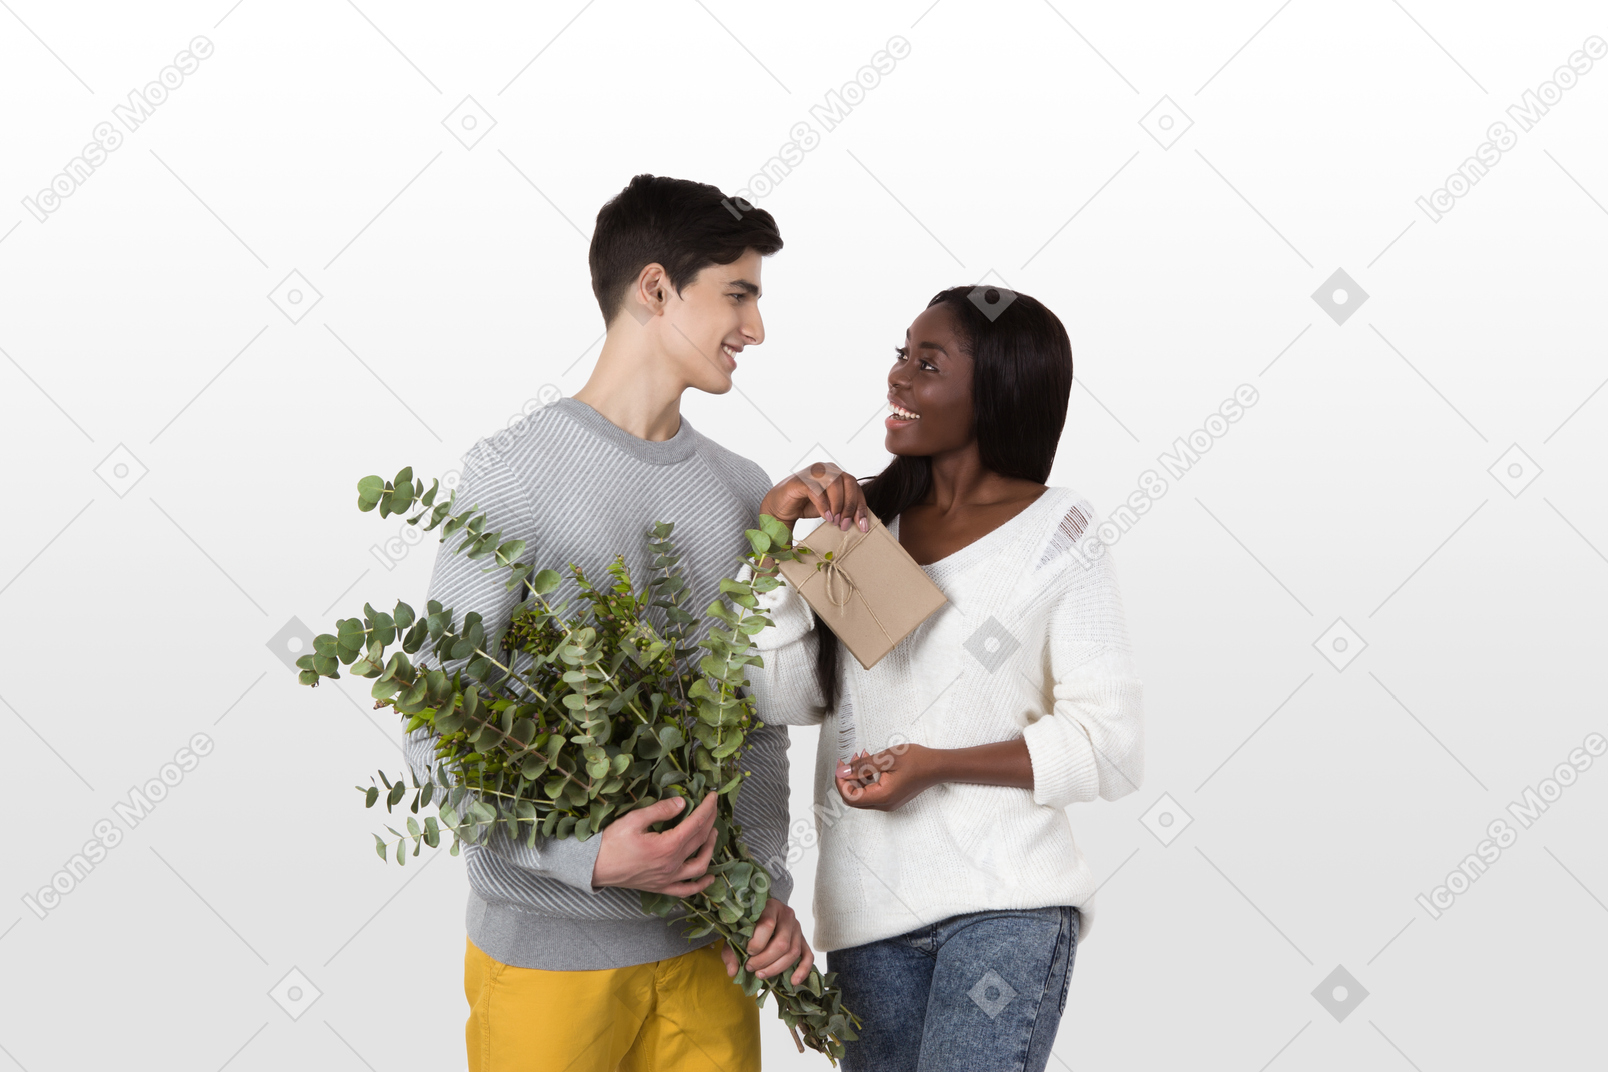 Interracial couple: white man and black woman